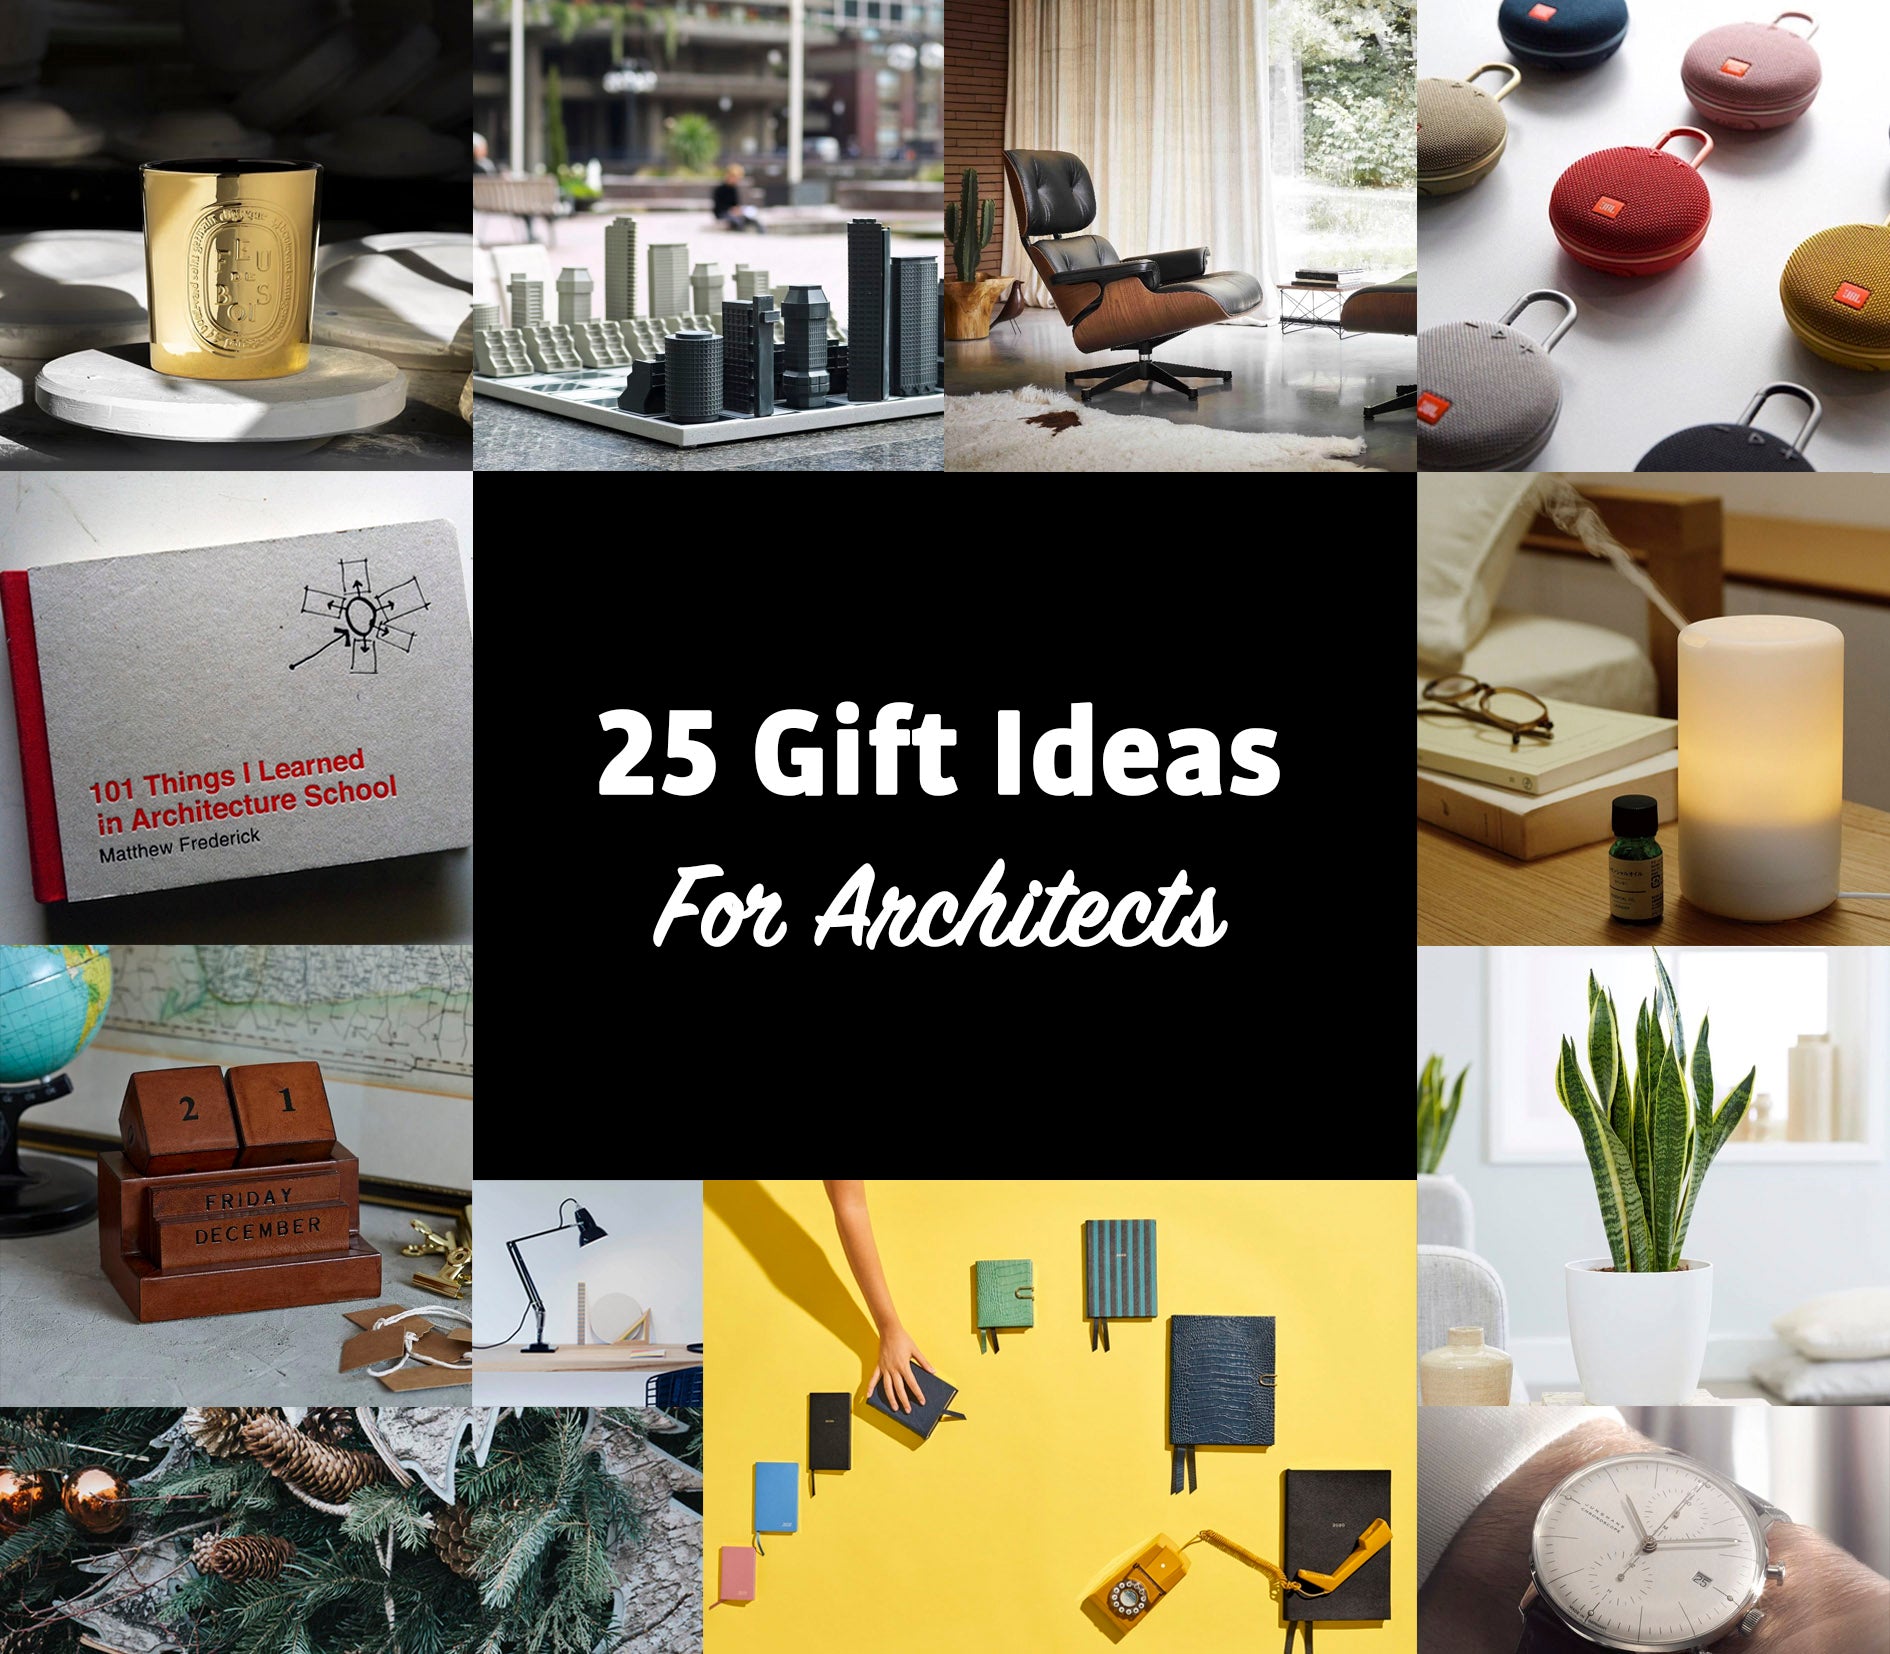 The Ultimate Gift Guide With Over 50 Ideas For Interior Designers,  Architects, And Design Lovers Finding a gift for an interior designer,  architect, or design lover can sometimes be a difficult task